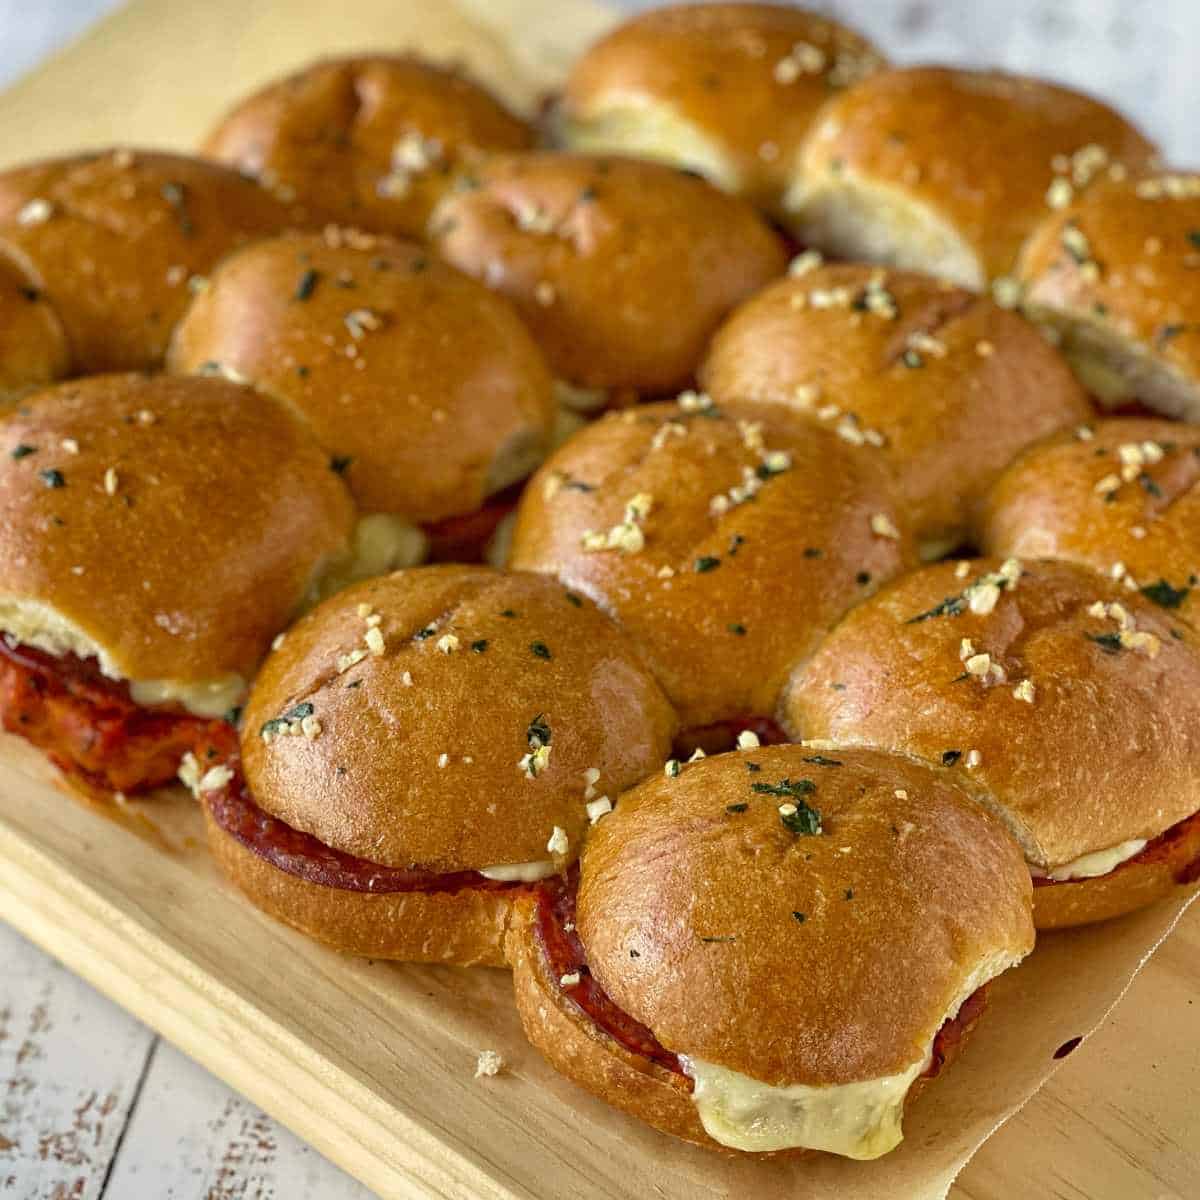 Cooked pepperoni sliders assembled on a wooden chopping board